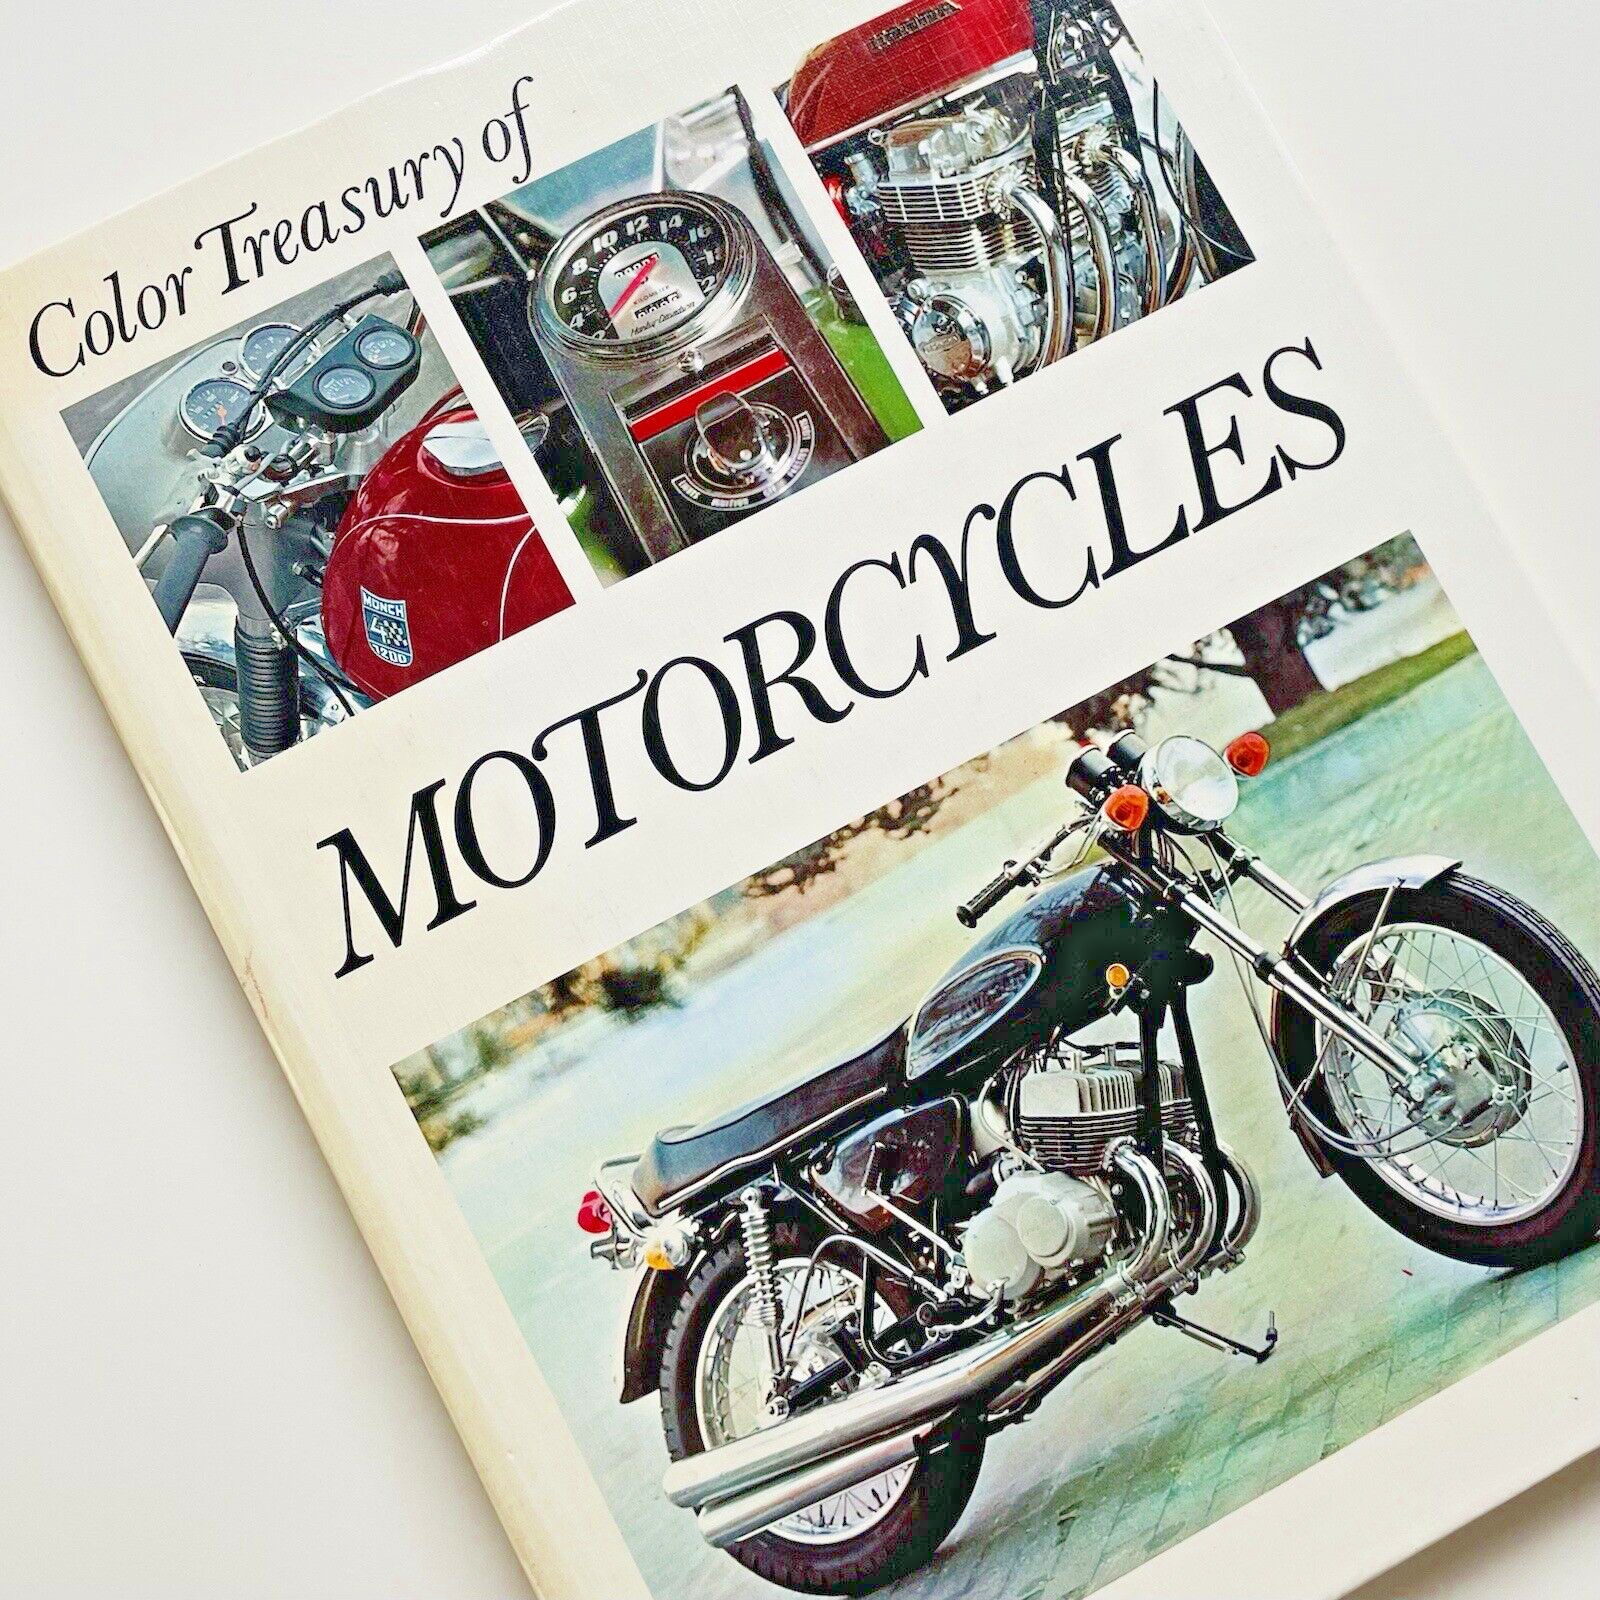 Color Treasury of Motorcycles - Classics & Thoroughbreds - Hardcover - 64 pages